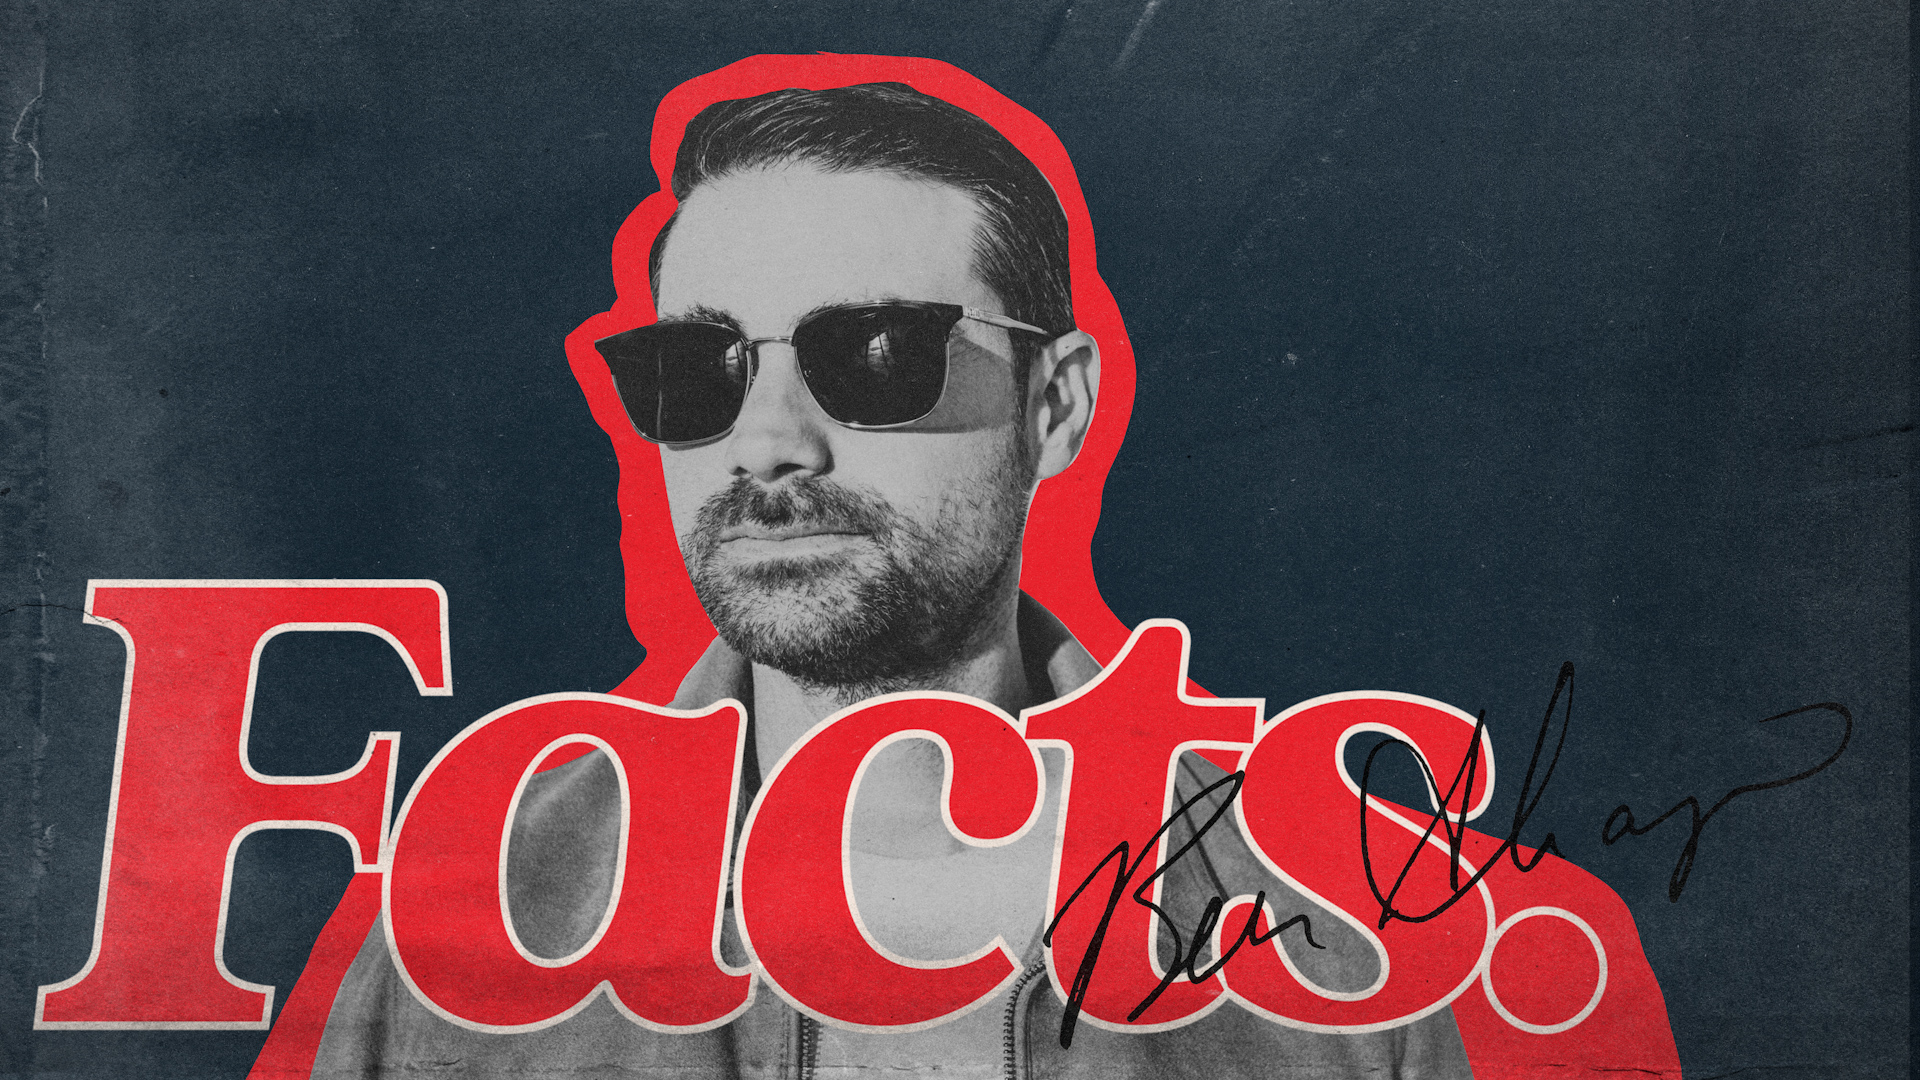 Ben Shapiro exposes the truth about Israel and Palestine in his latest ‘Facts’ episode: “You’re being deceived.”